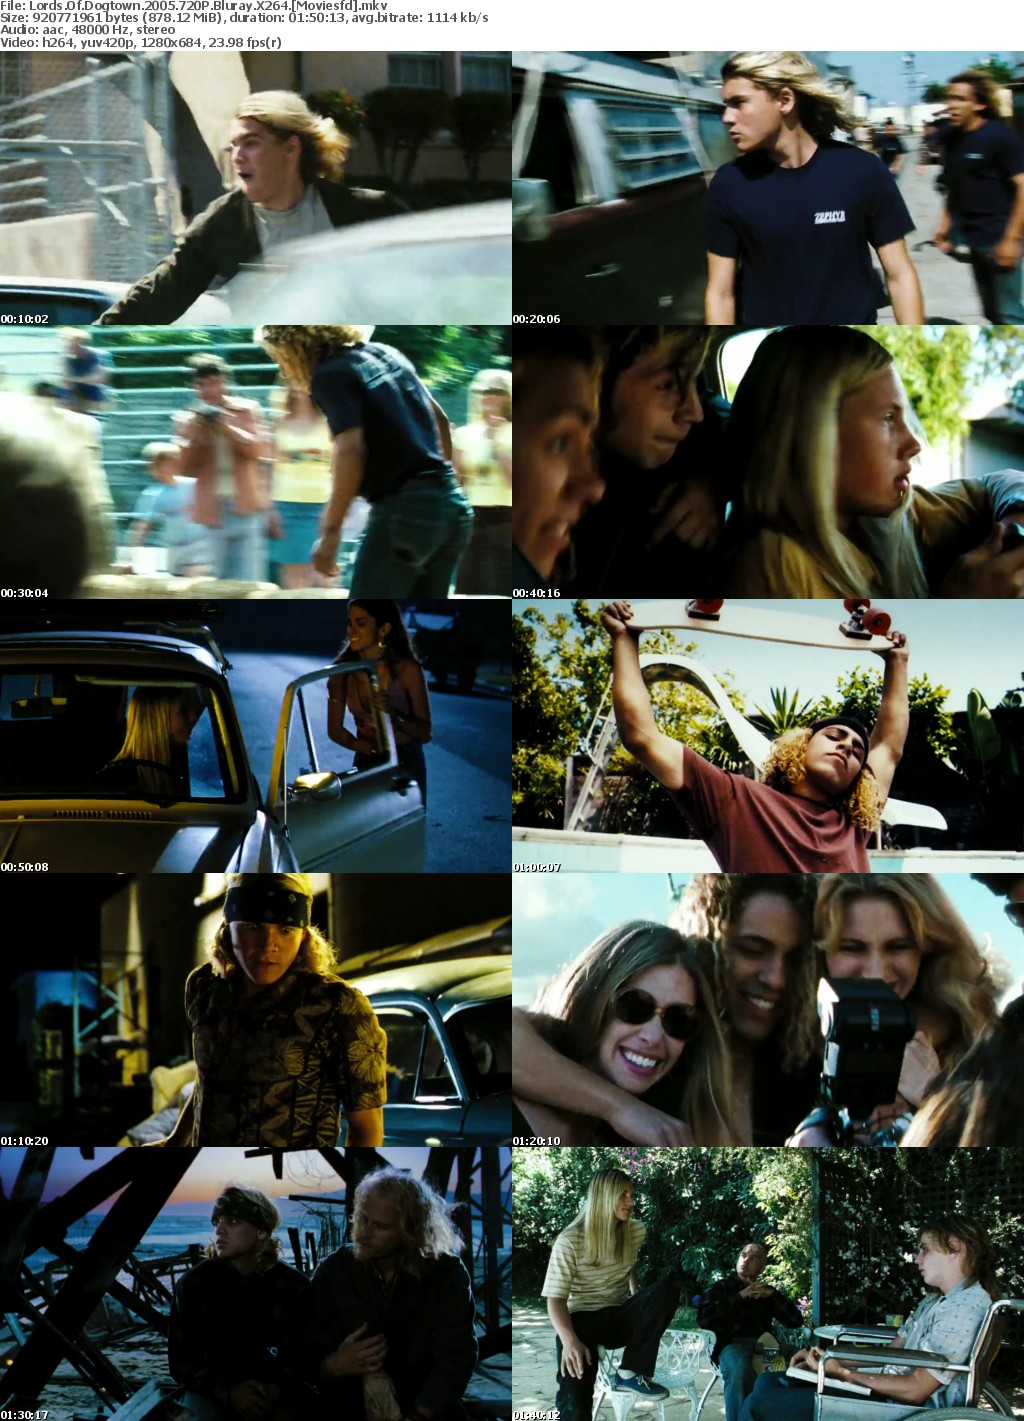 Lords of Dogtown (2005) 720p BluRay X264 MoviesFD